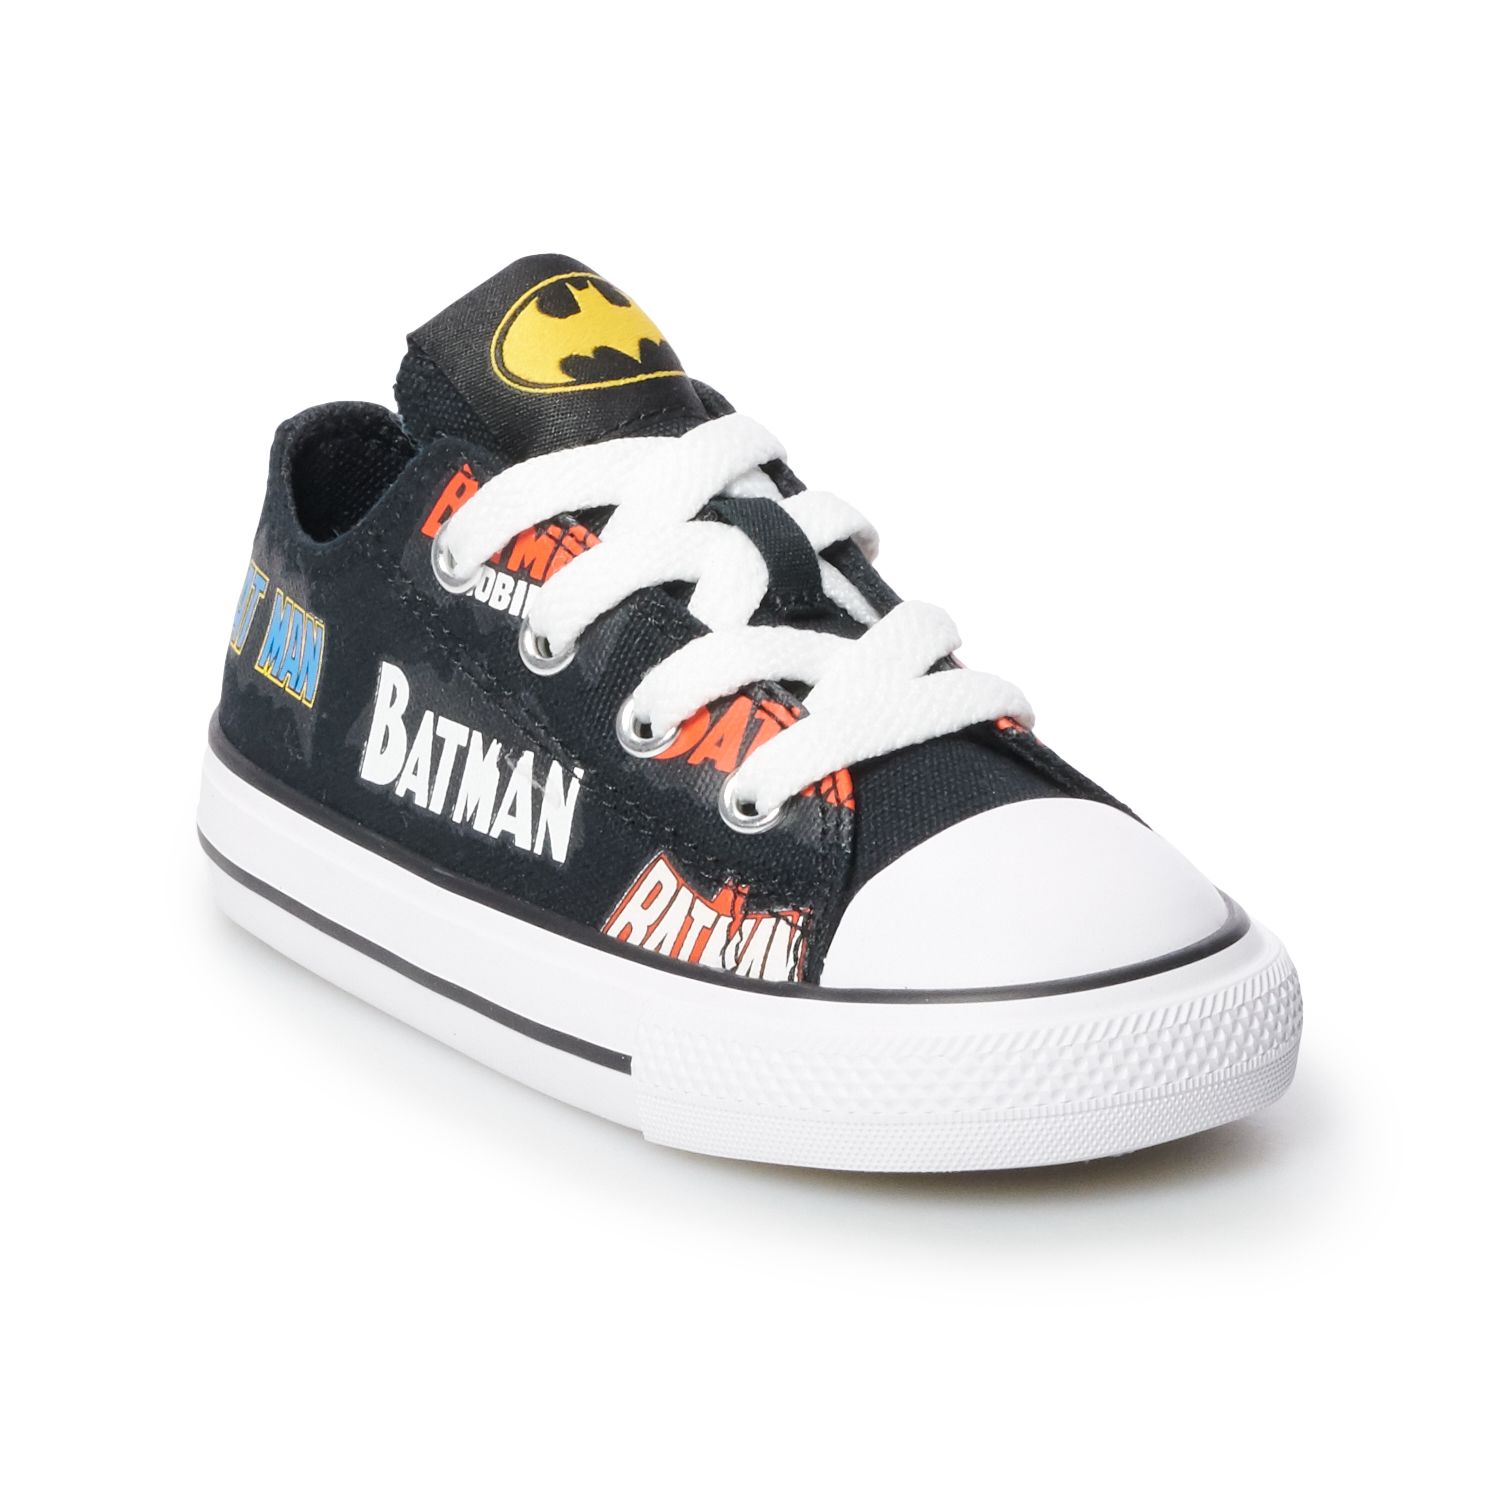 batman converse shoes for toddlers